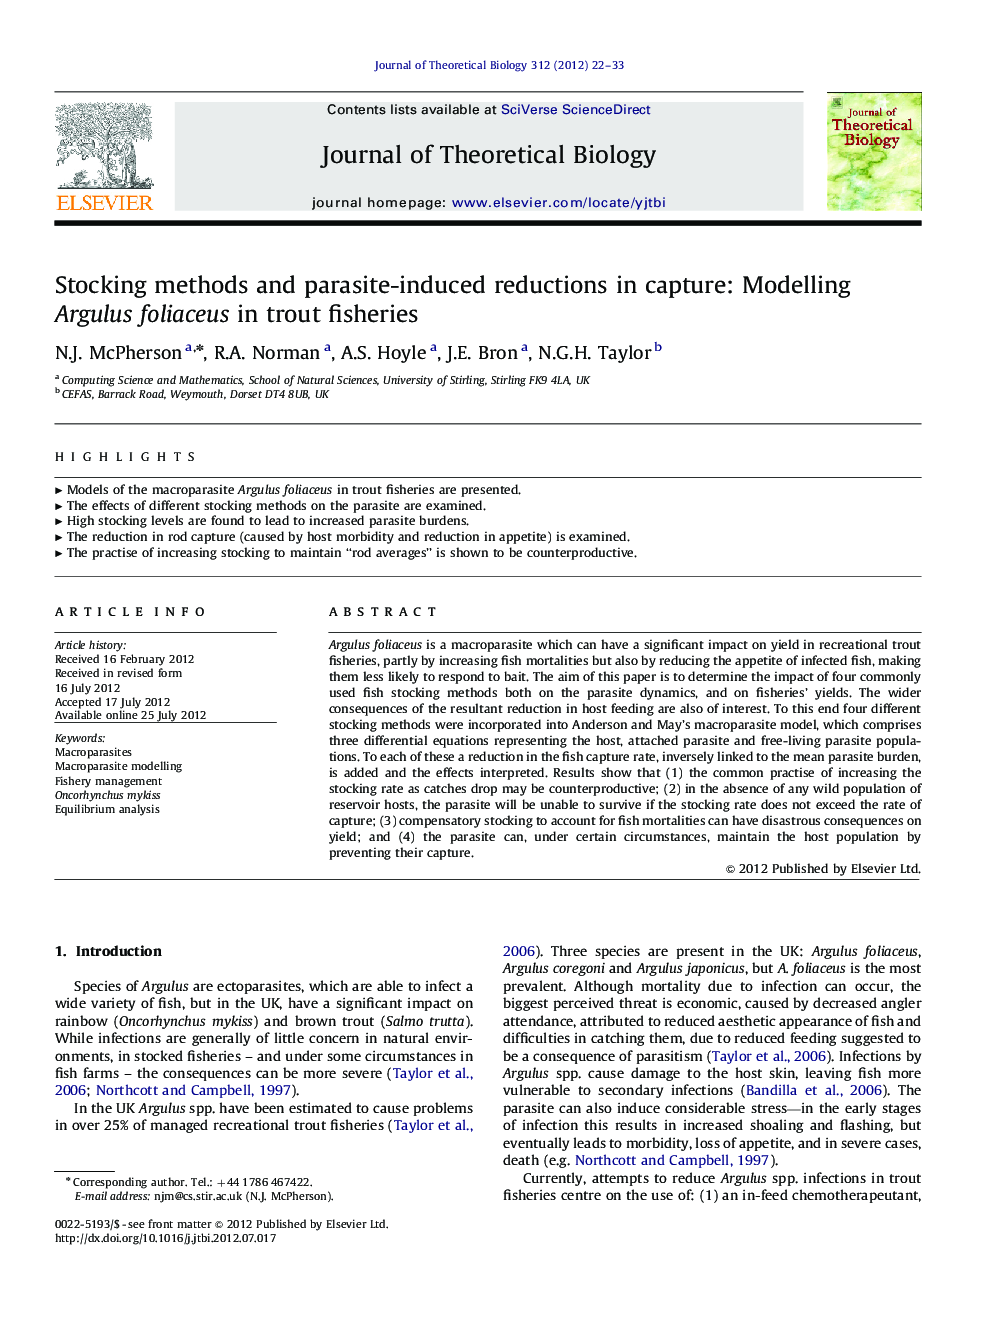 Stocking methods and parasite-induced reductions in capture: Modelling Argulus foliaceus in trout fisheries